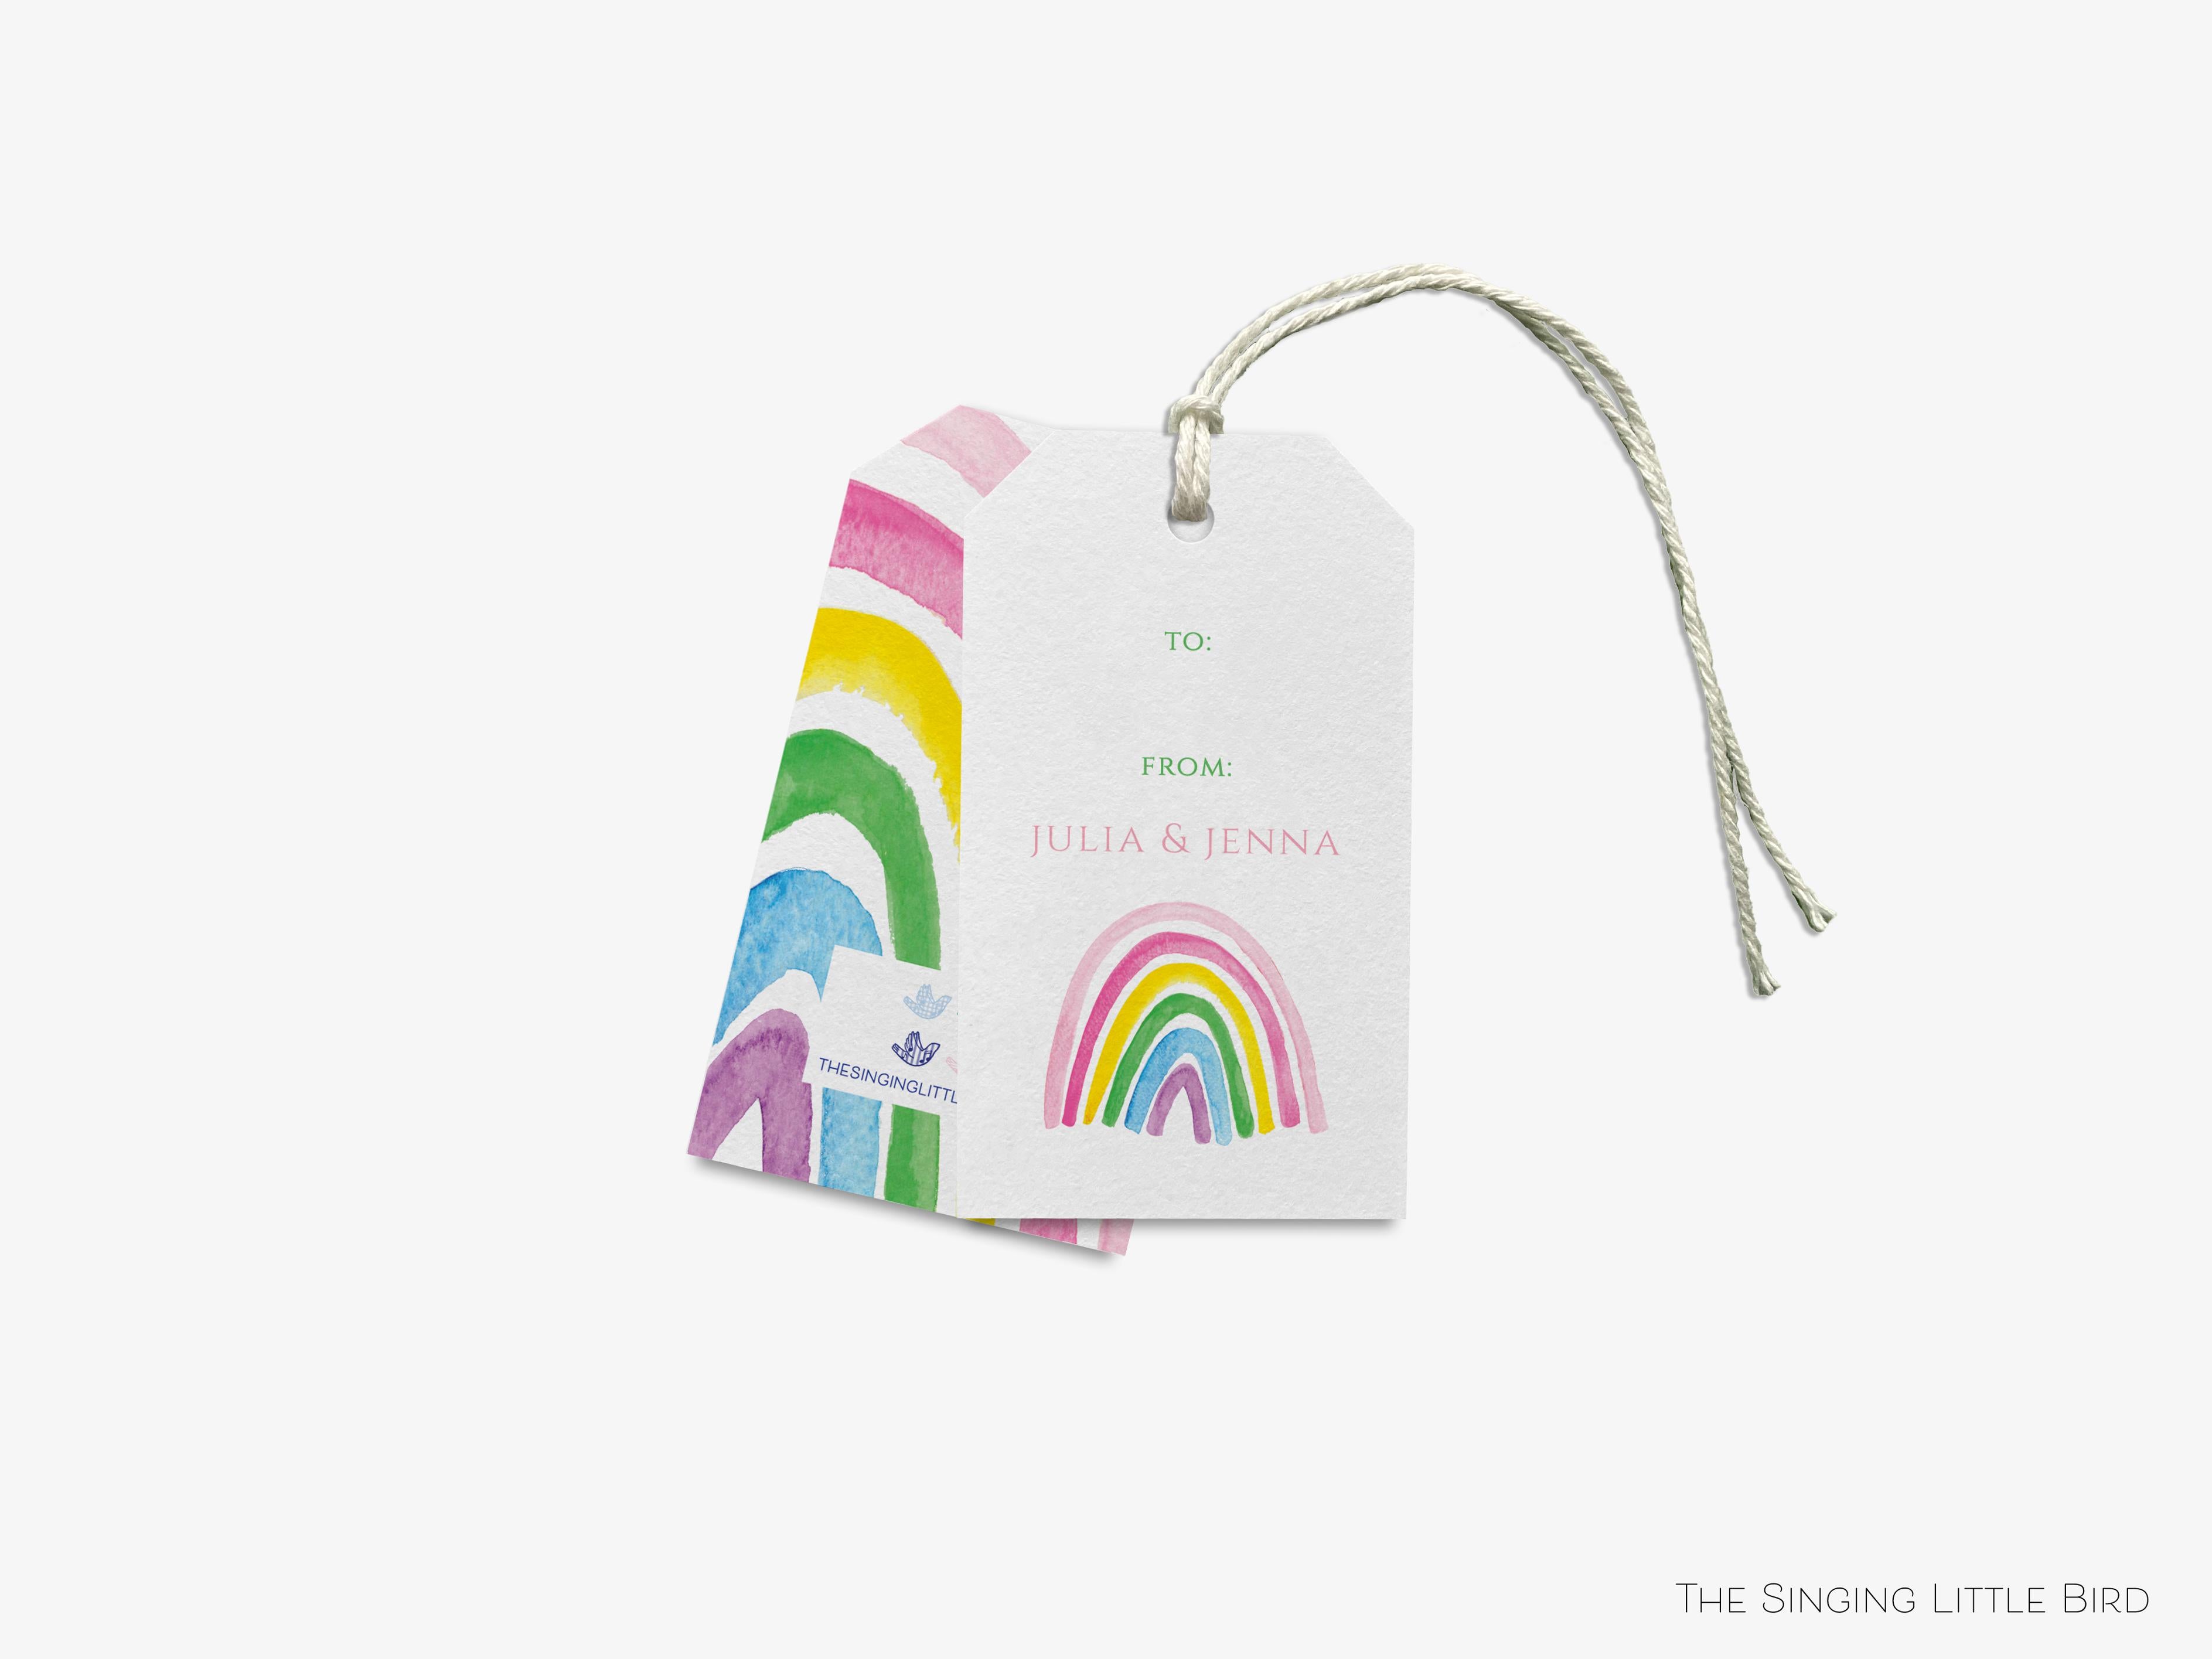 Personalized Colorful Pink Rainbow Gift Tags-These gift tags come in sets, hole-punched with white twine and feature our hand-painted watercolor pink rainbows, printed in the USA on 120lb textured stock. They make great tags for gifting or gifts for the cheerful loved one in your life.-The Singing Little Bird